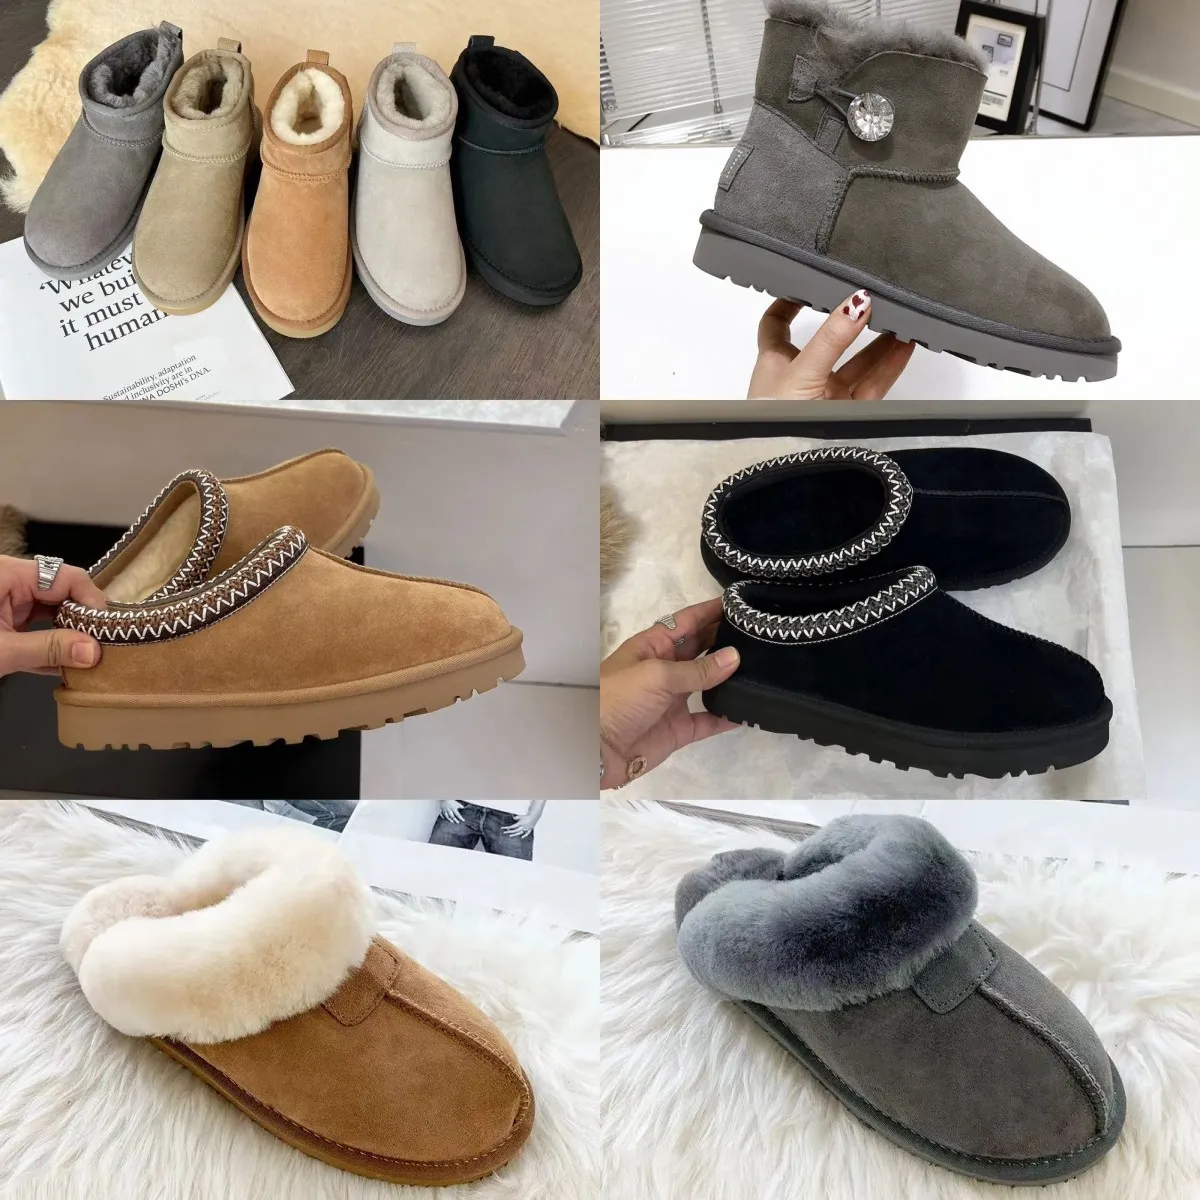 Boots Boots Boots Boots Tasman Slippers Tazz Baby Boots Snow Boots Australia Mini Booties Boot for Girls Women Boot Winter Filuffy Shoes for Kids Soede Wool